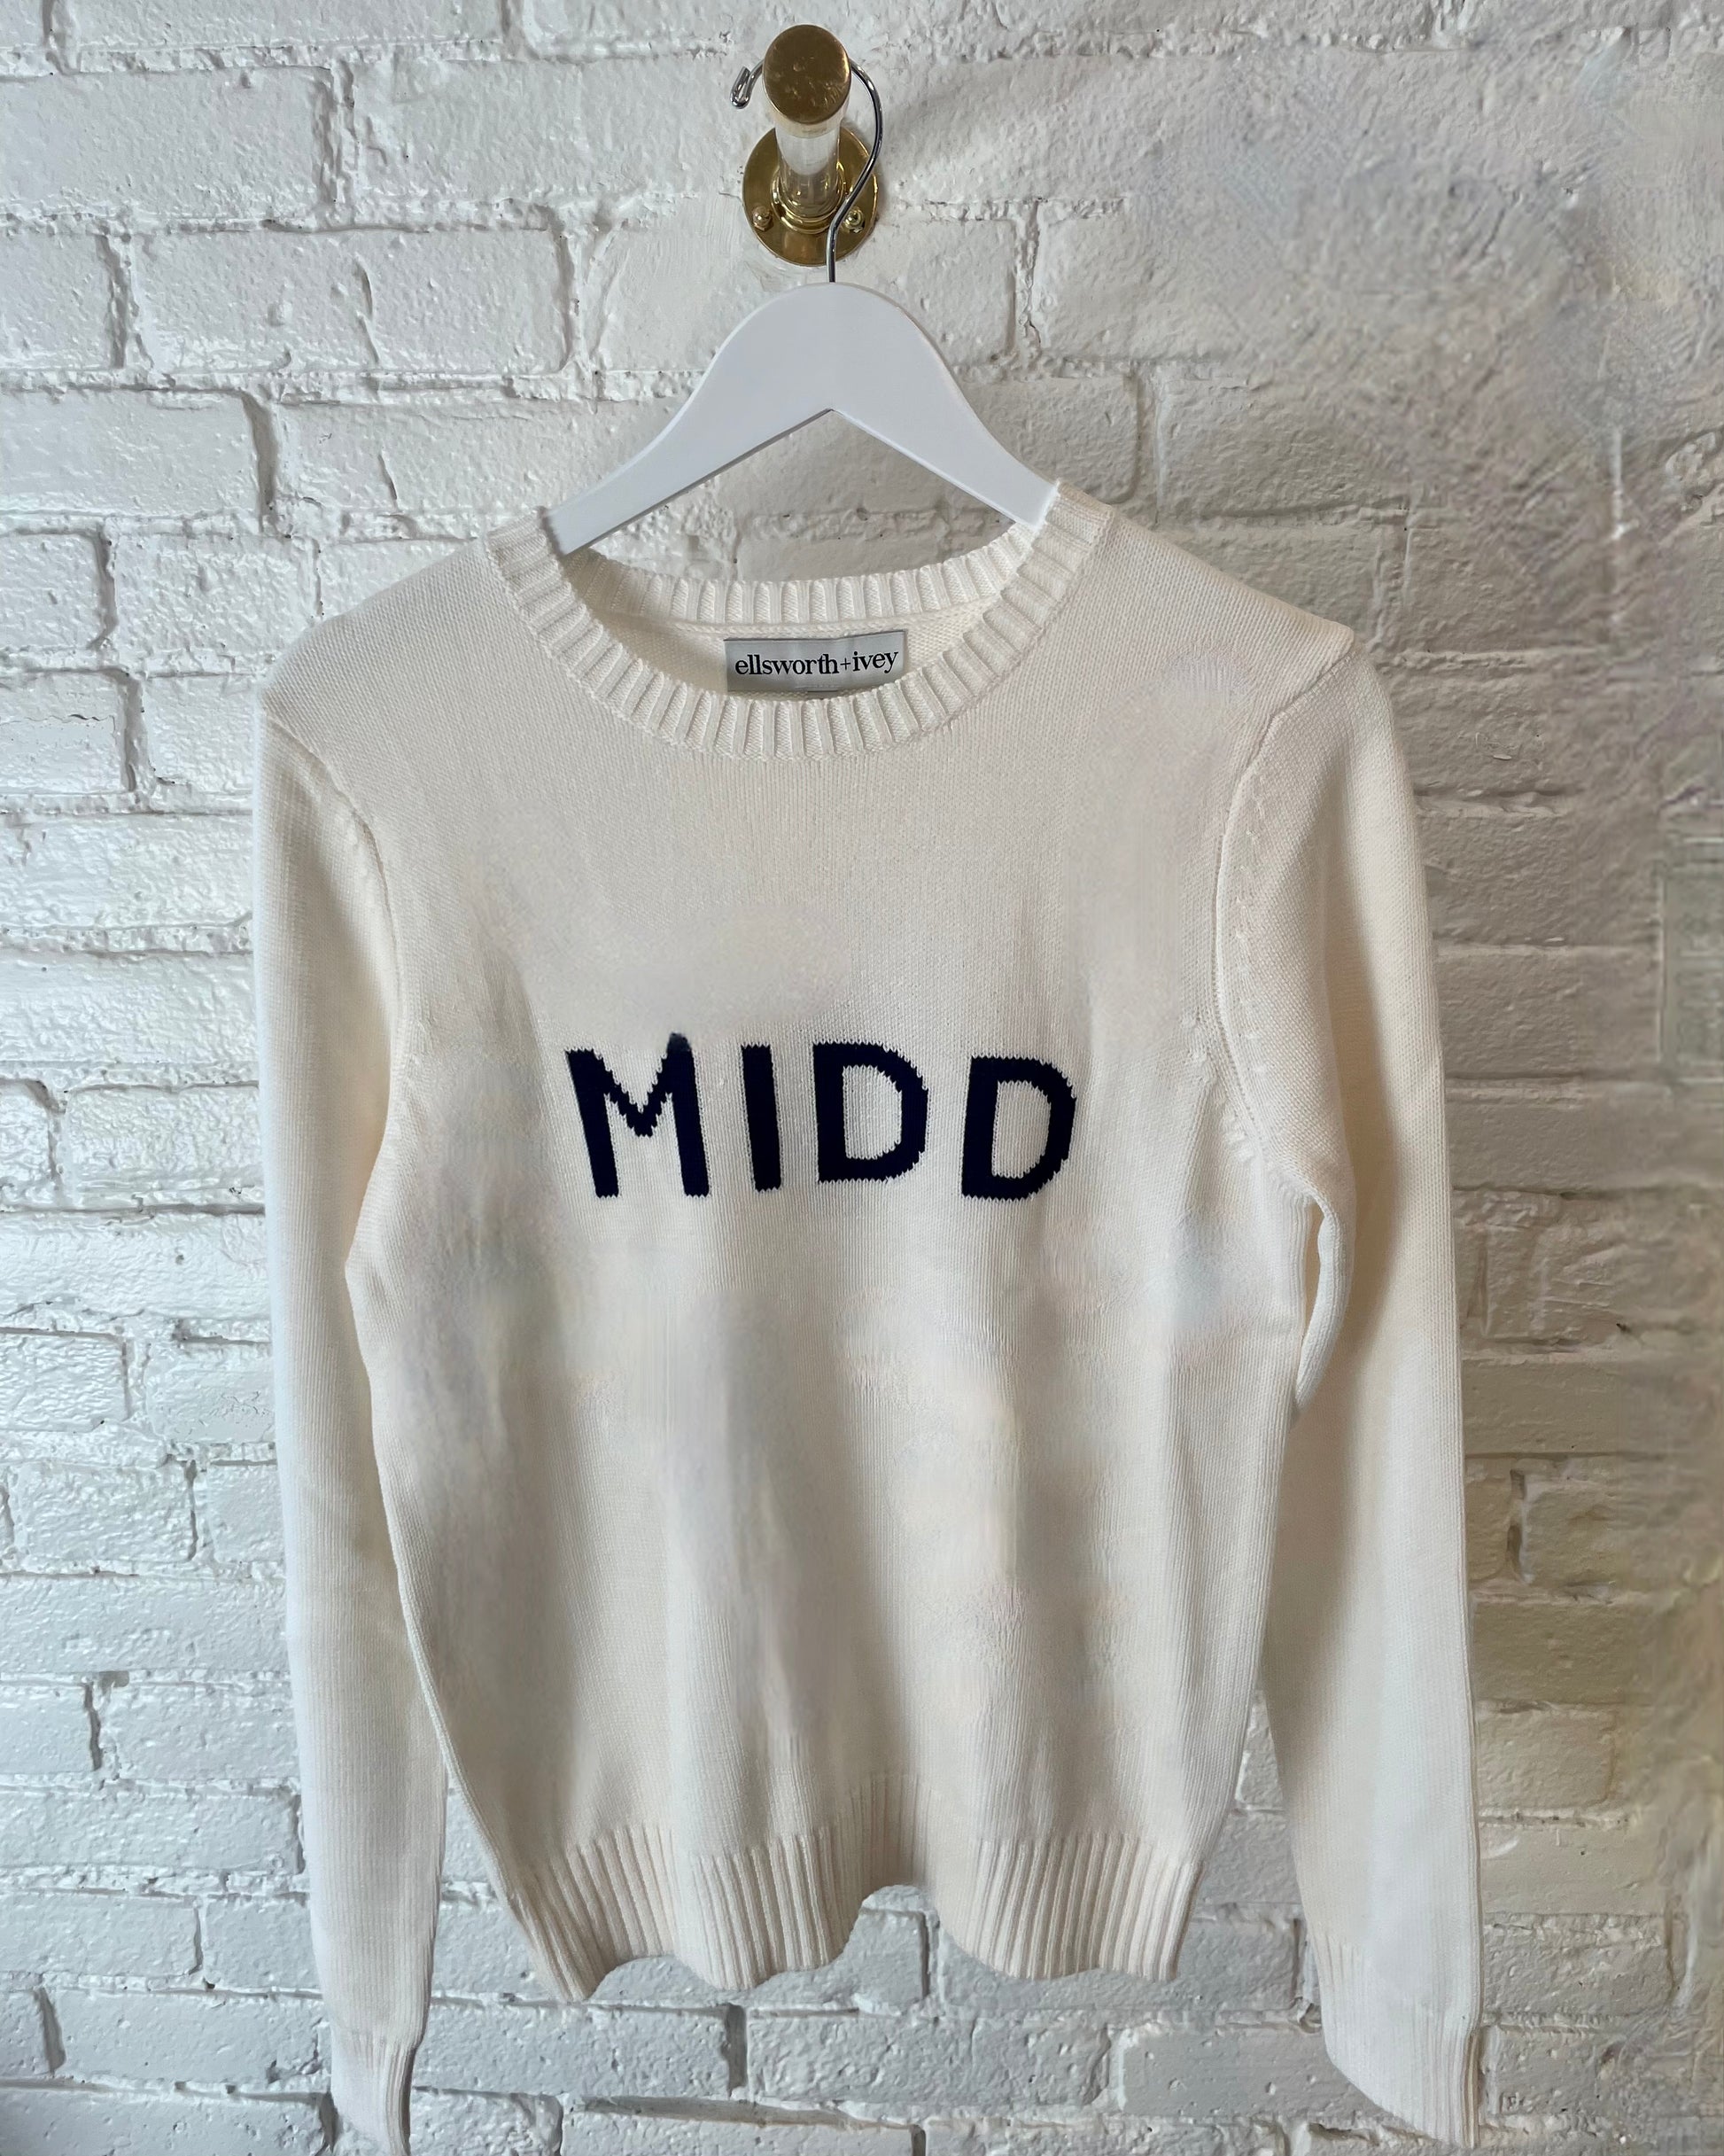 Middlebury College MIDD white sweater with blue letters from Ellsworth+Ivey on a white brick wall background